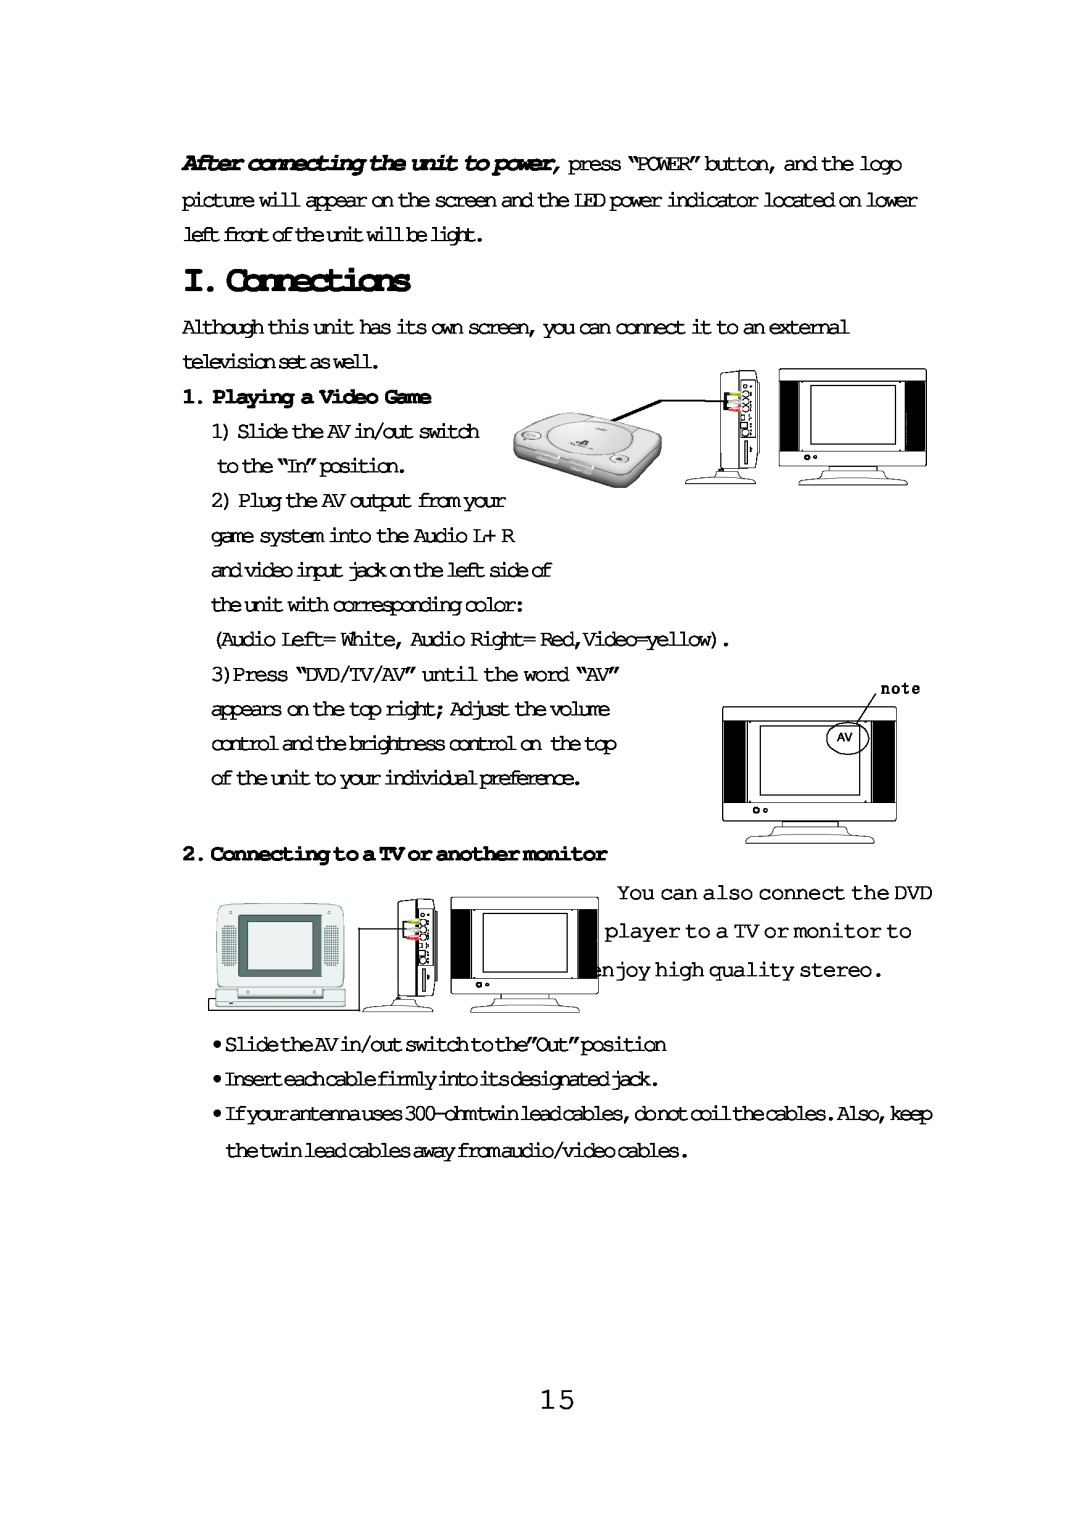 Audiovox FPE1087 operating instructions I.Connections, Playing a Video Game, Connecting to a TV or another monitor 